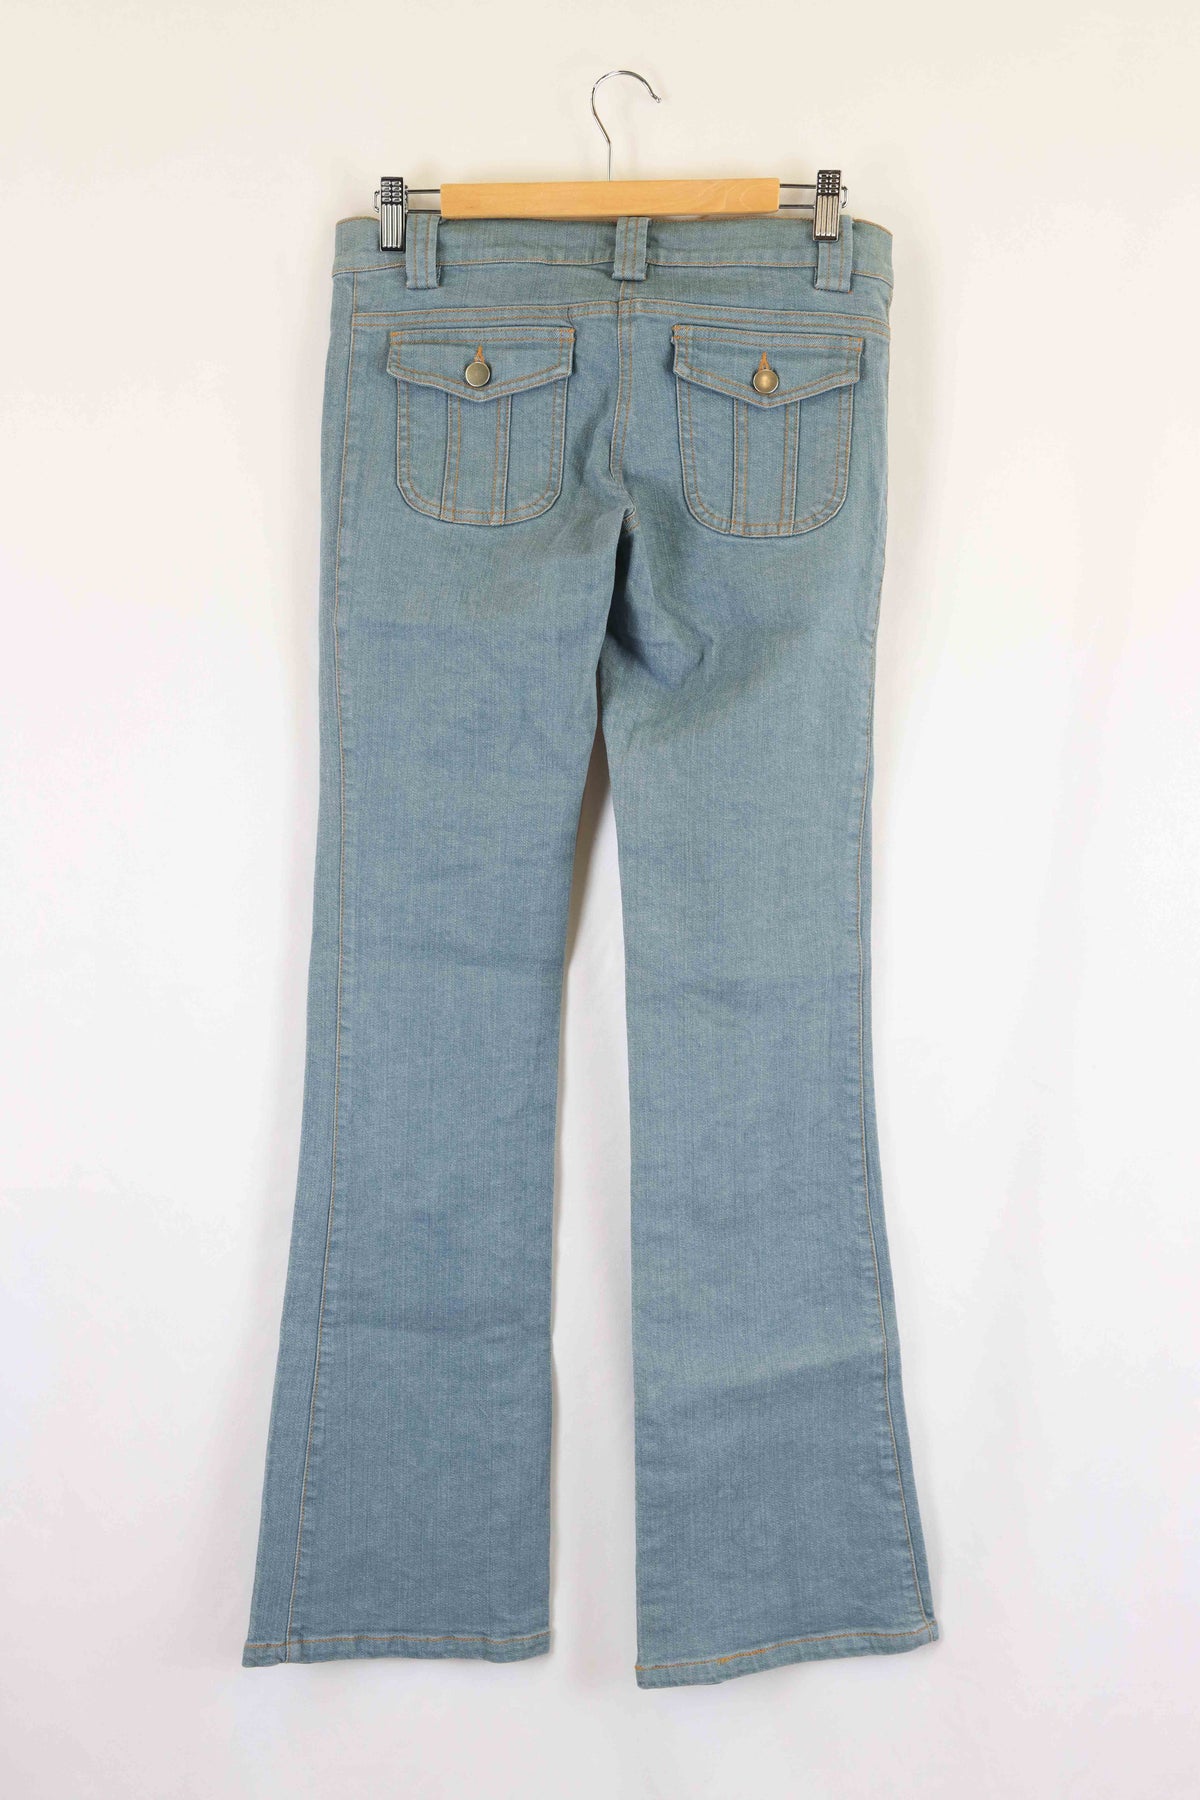 Play Clothing Flared Denim Jeans 10